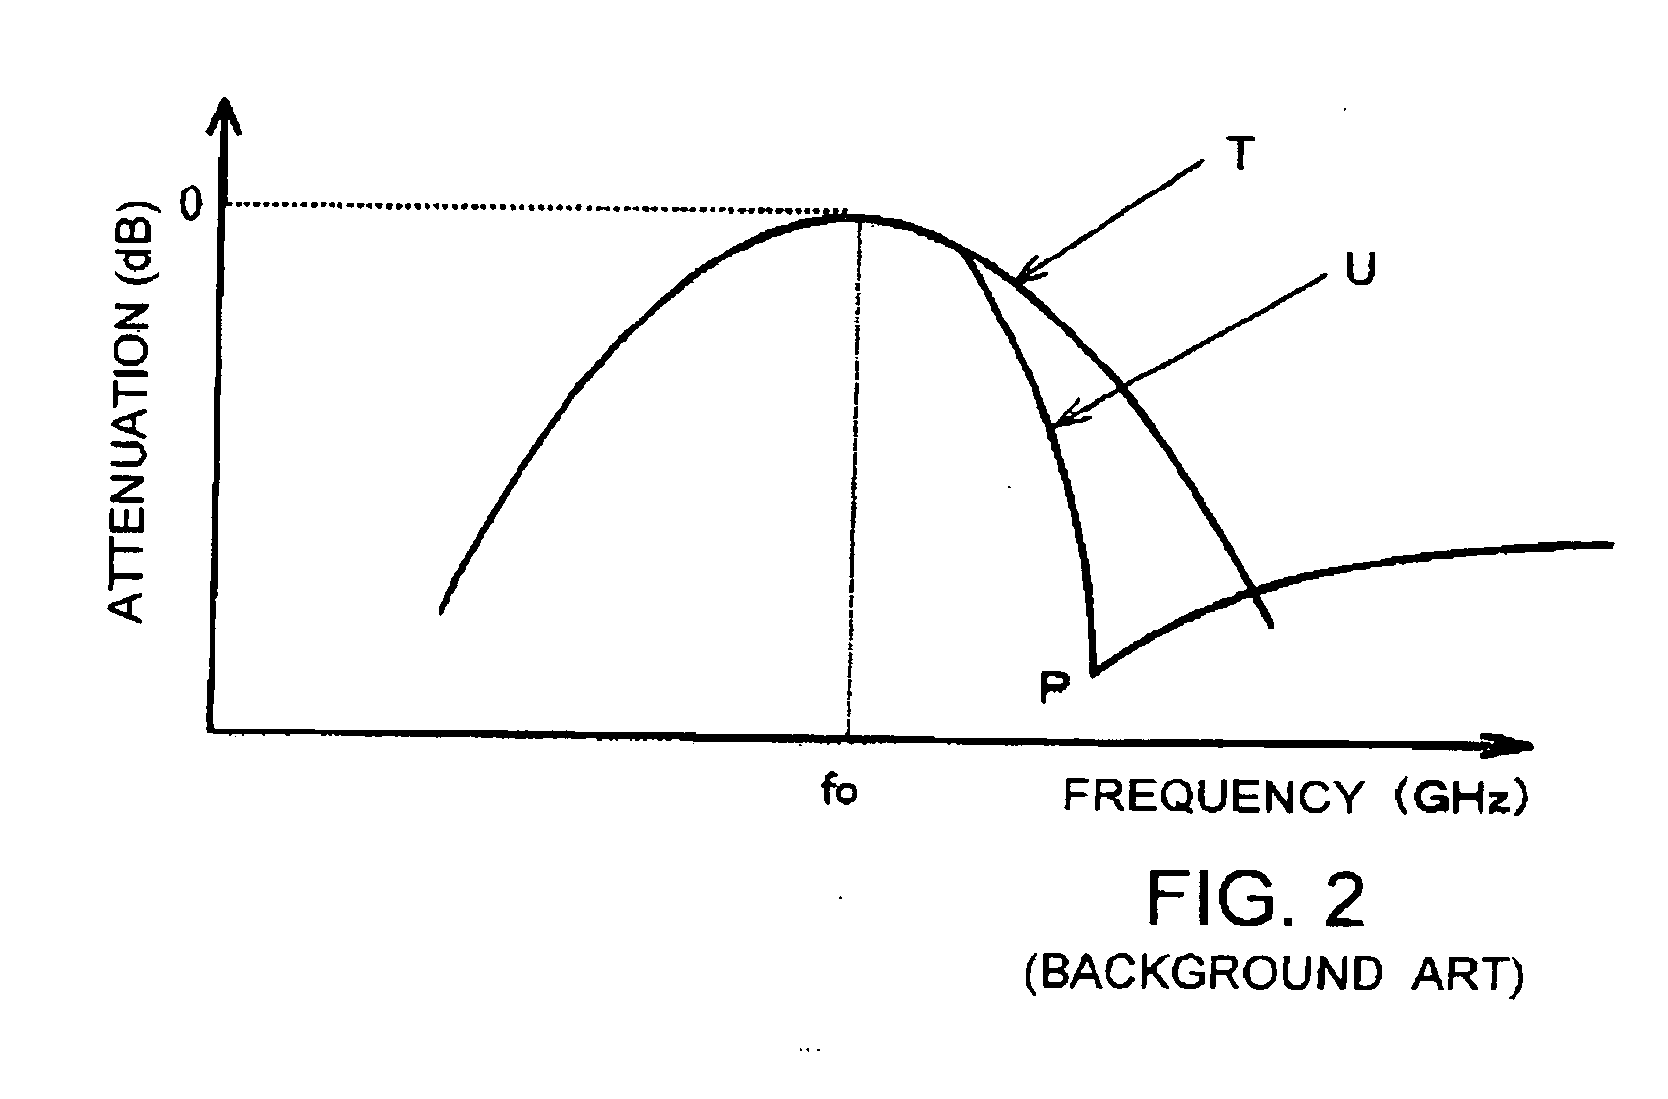 Variable-frequency high frequency filter